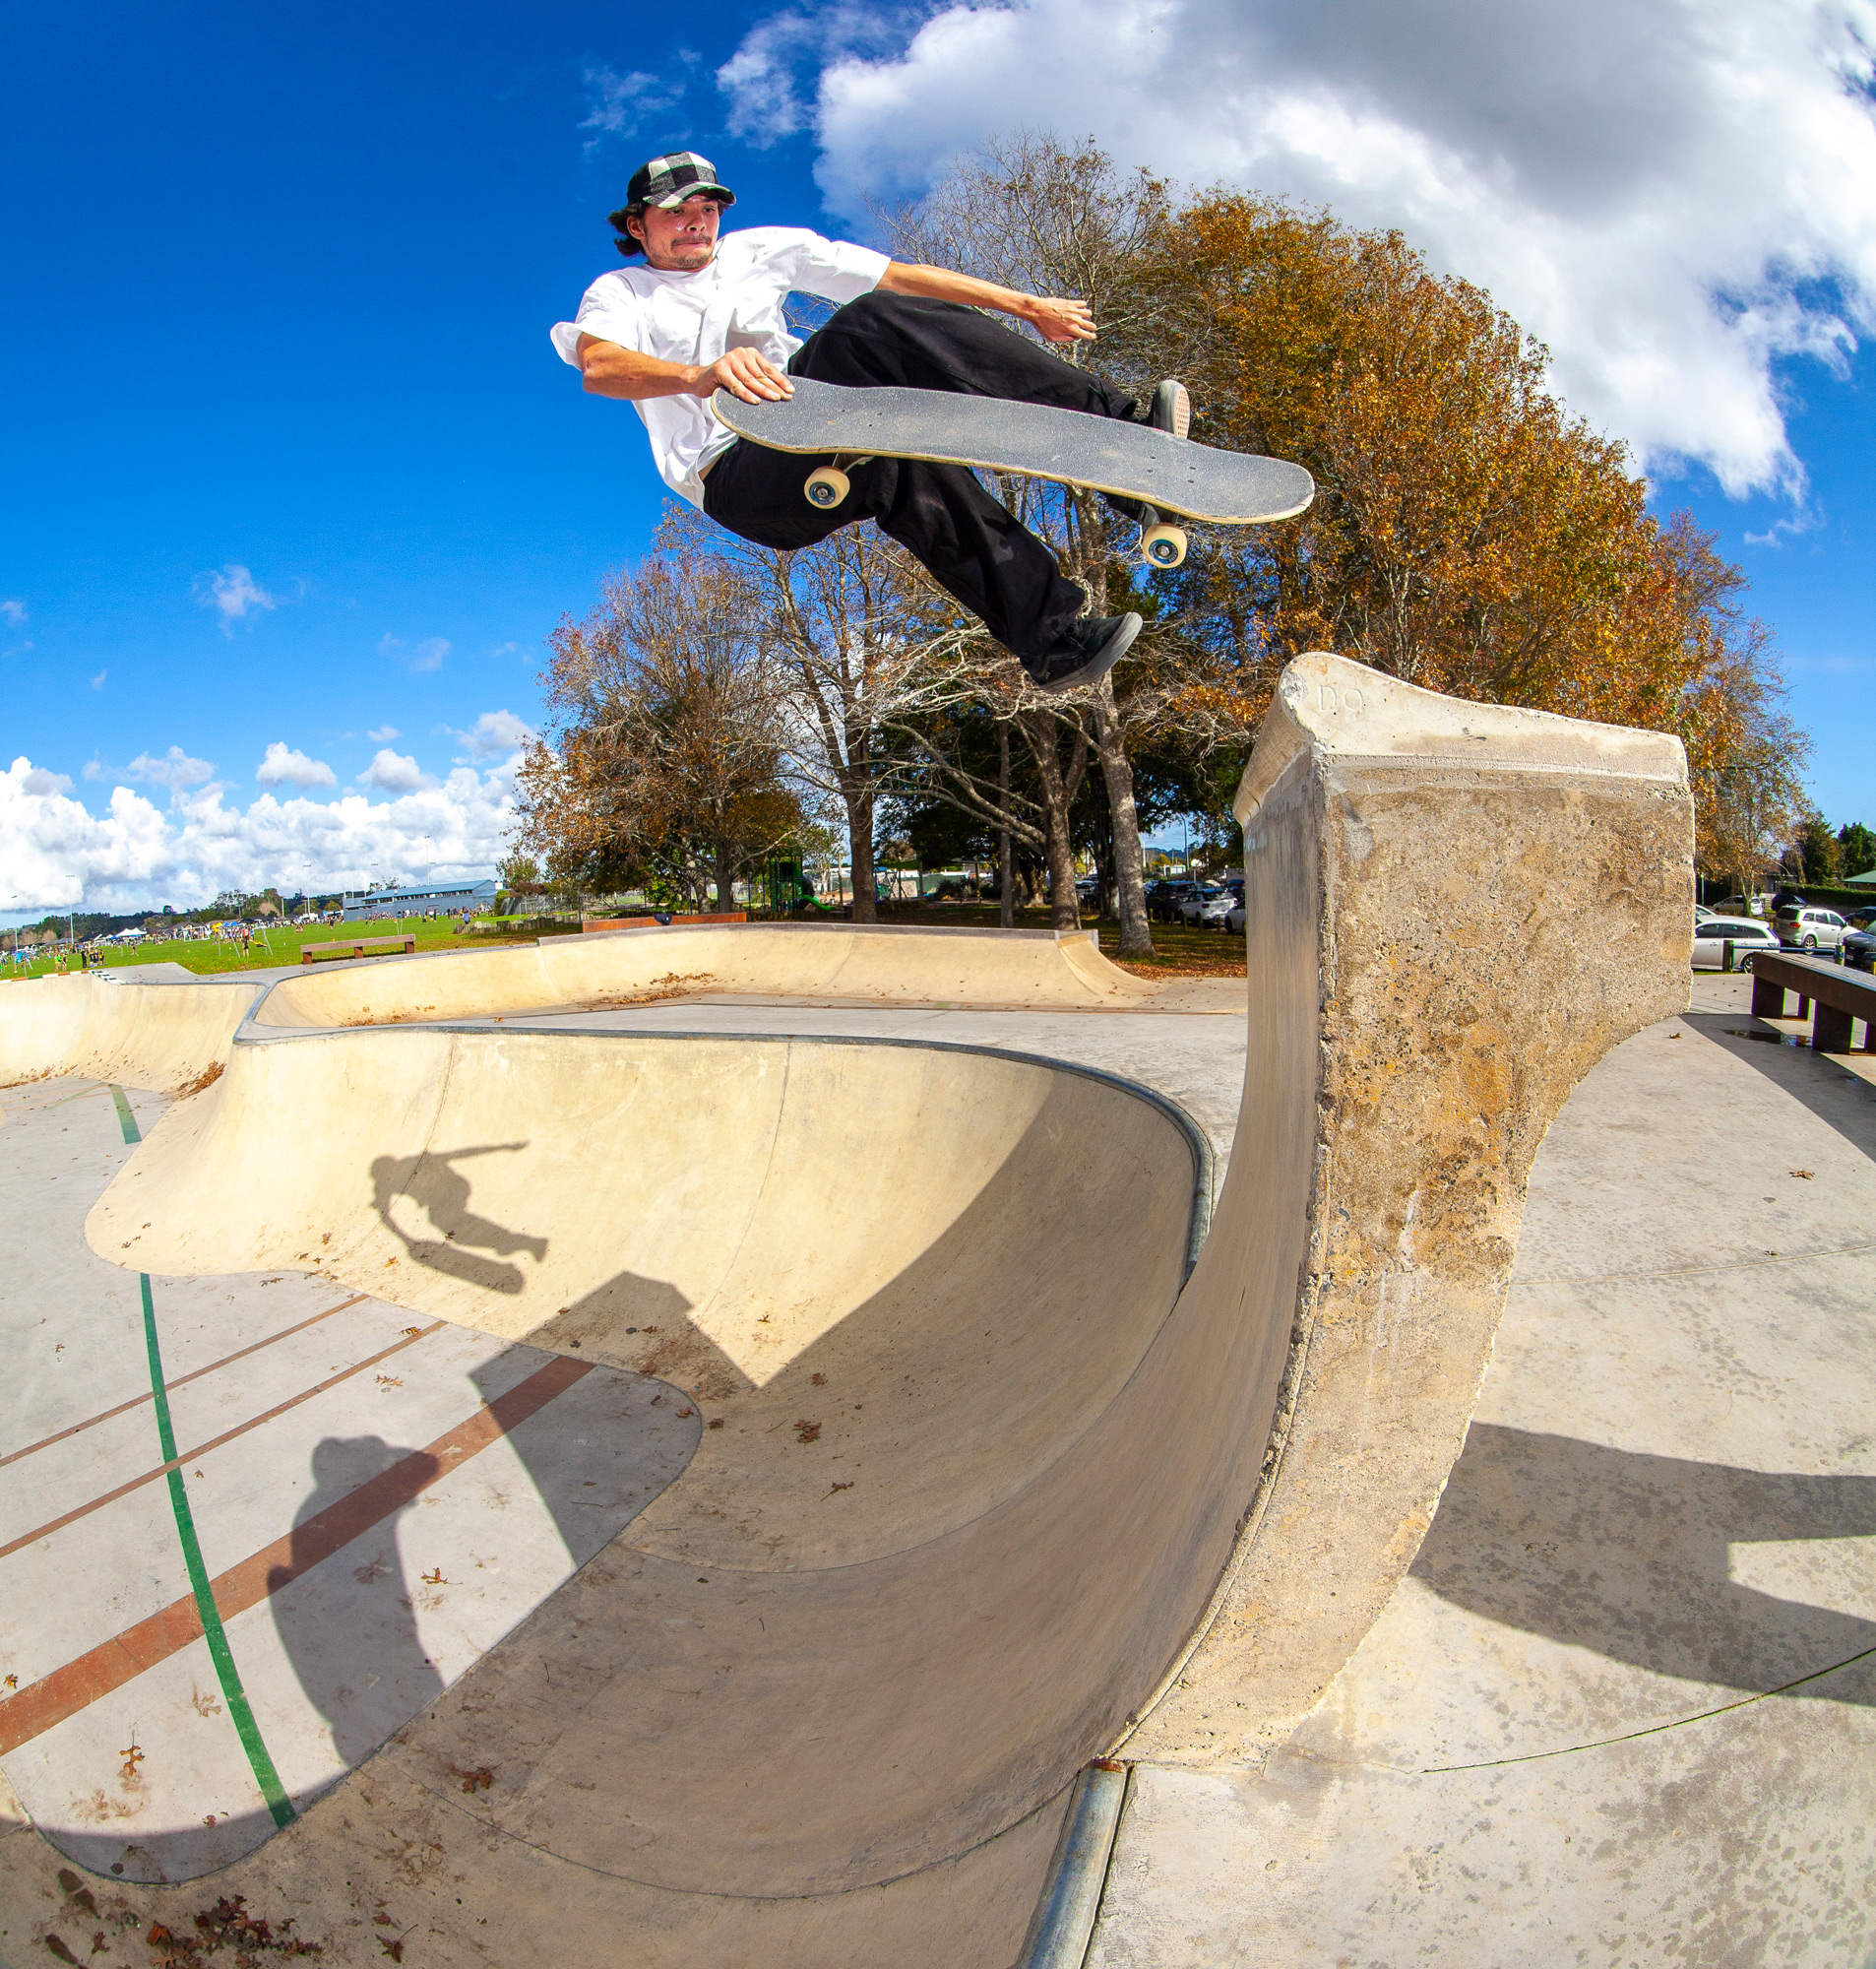 Dereck De Souza performing a Sal flip lien to tail on the extension of Tuakau bowl in South Auckland. Photo by David Read.